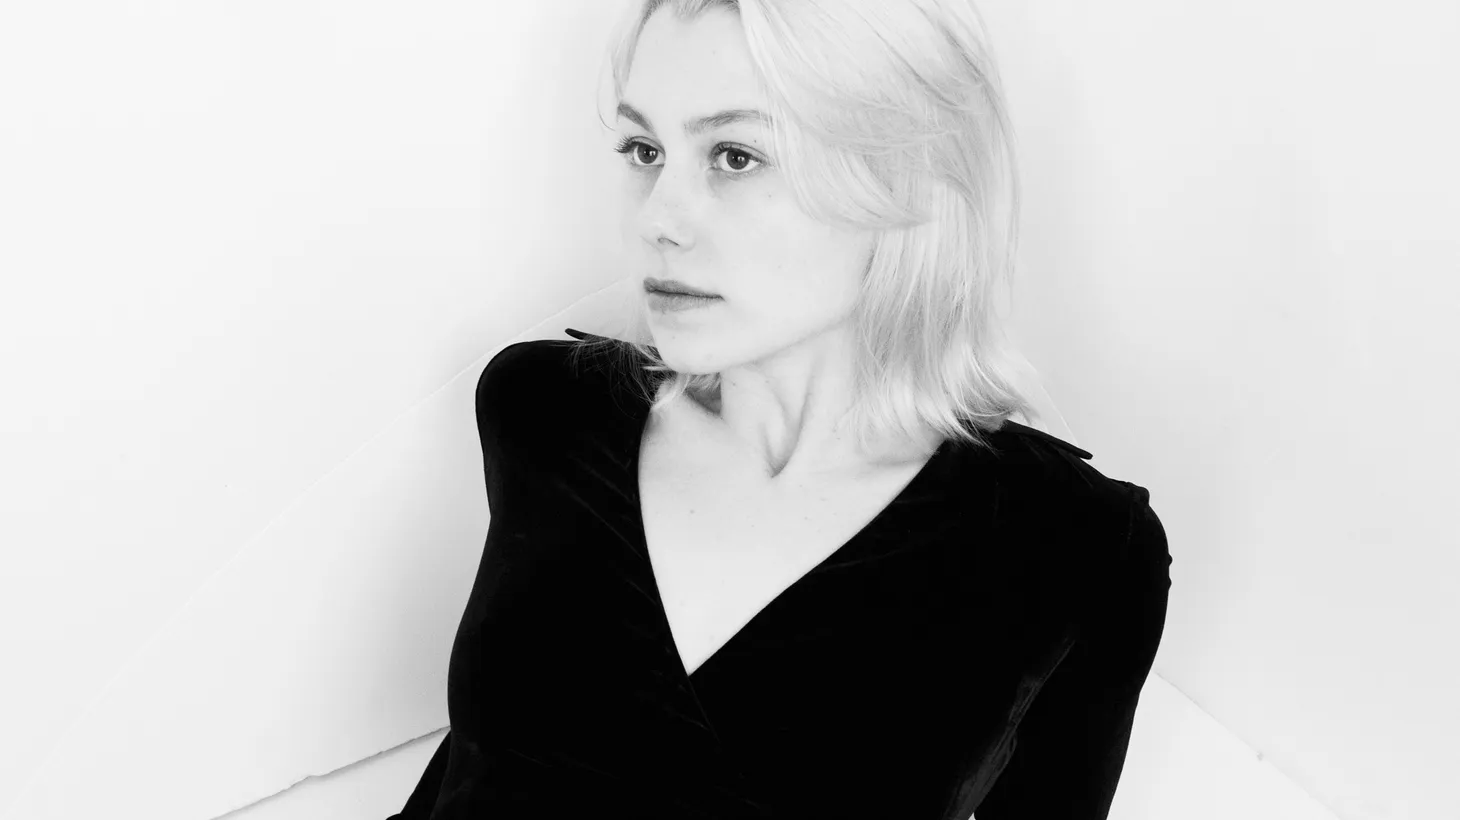 Phoebe Bridgers is a promising young singer-songwriter based in Los Angeles whose songwriting explores complex emotions in imaginative ways.